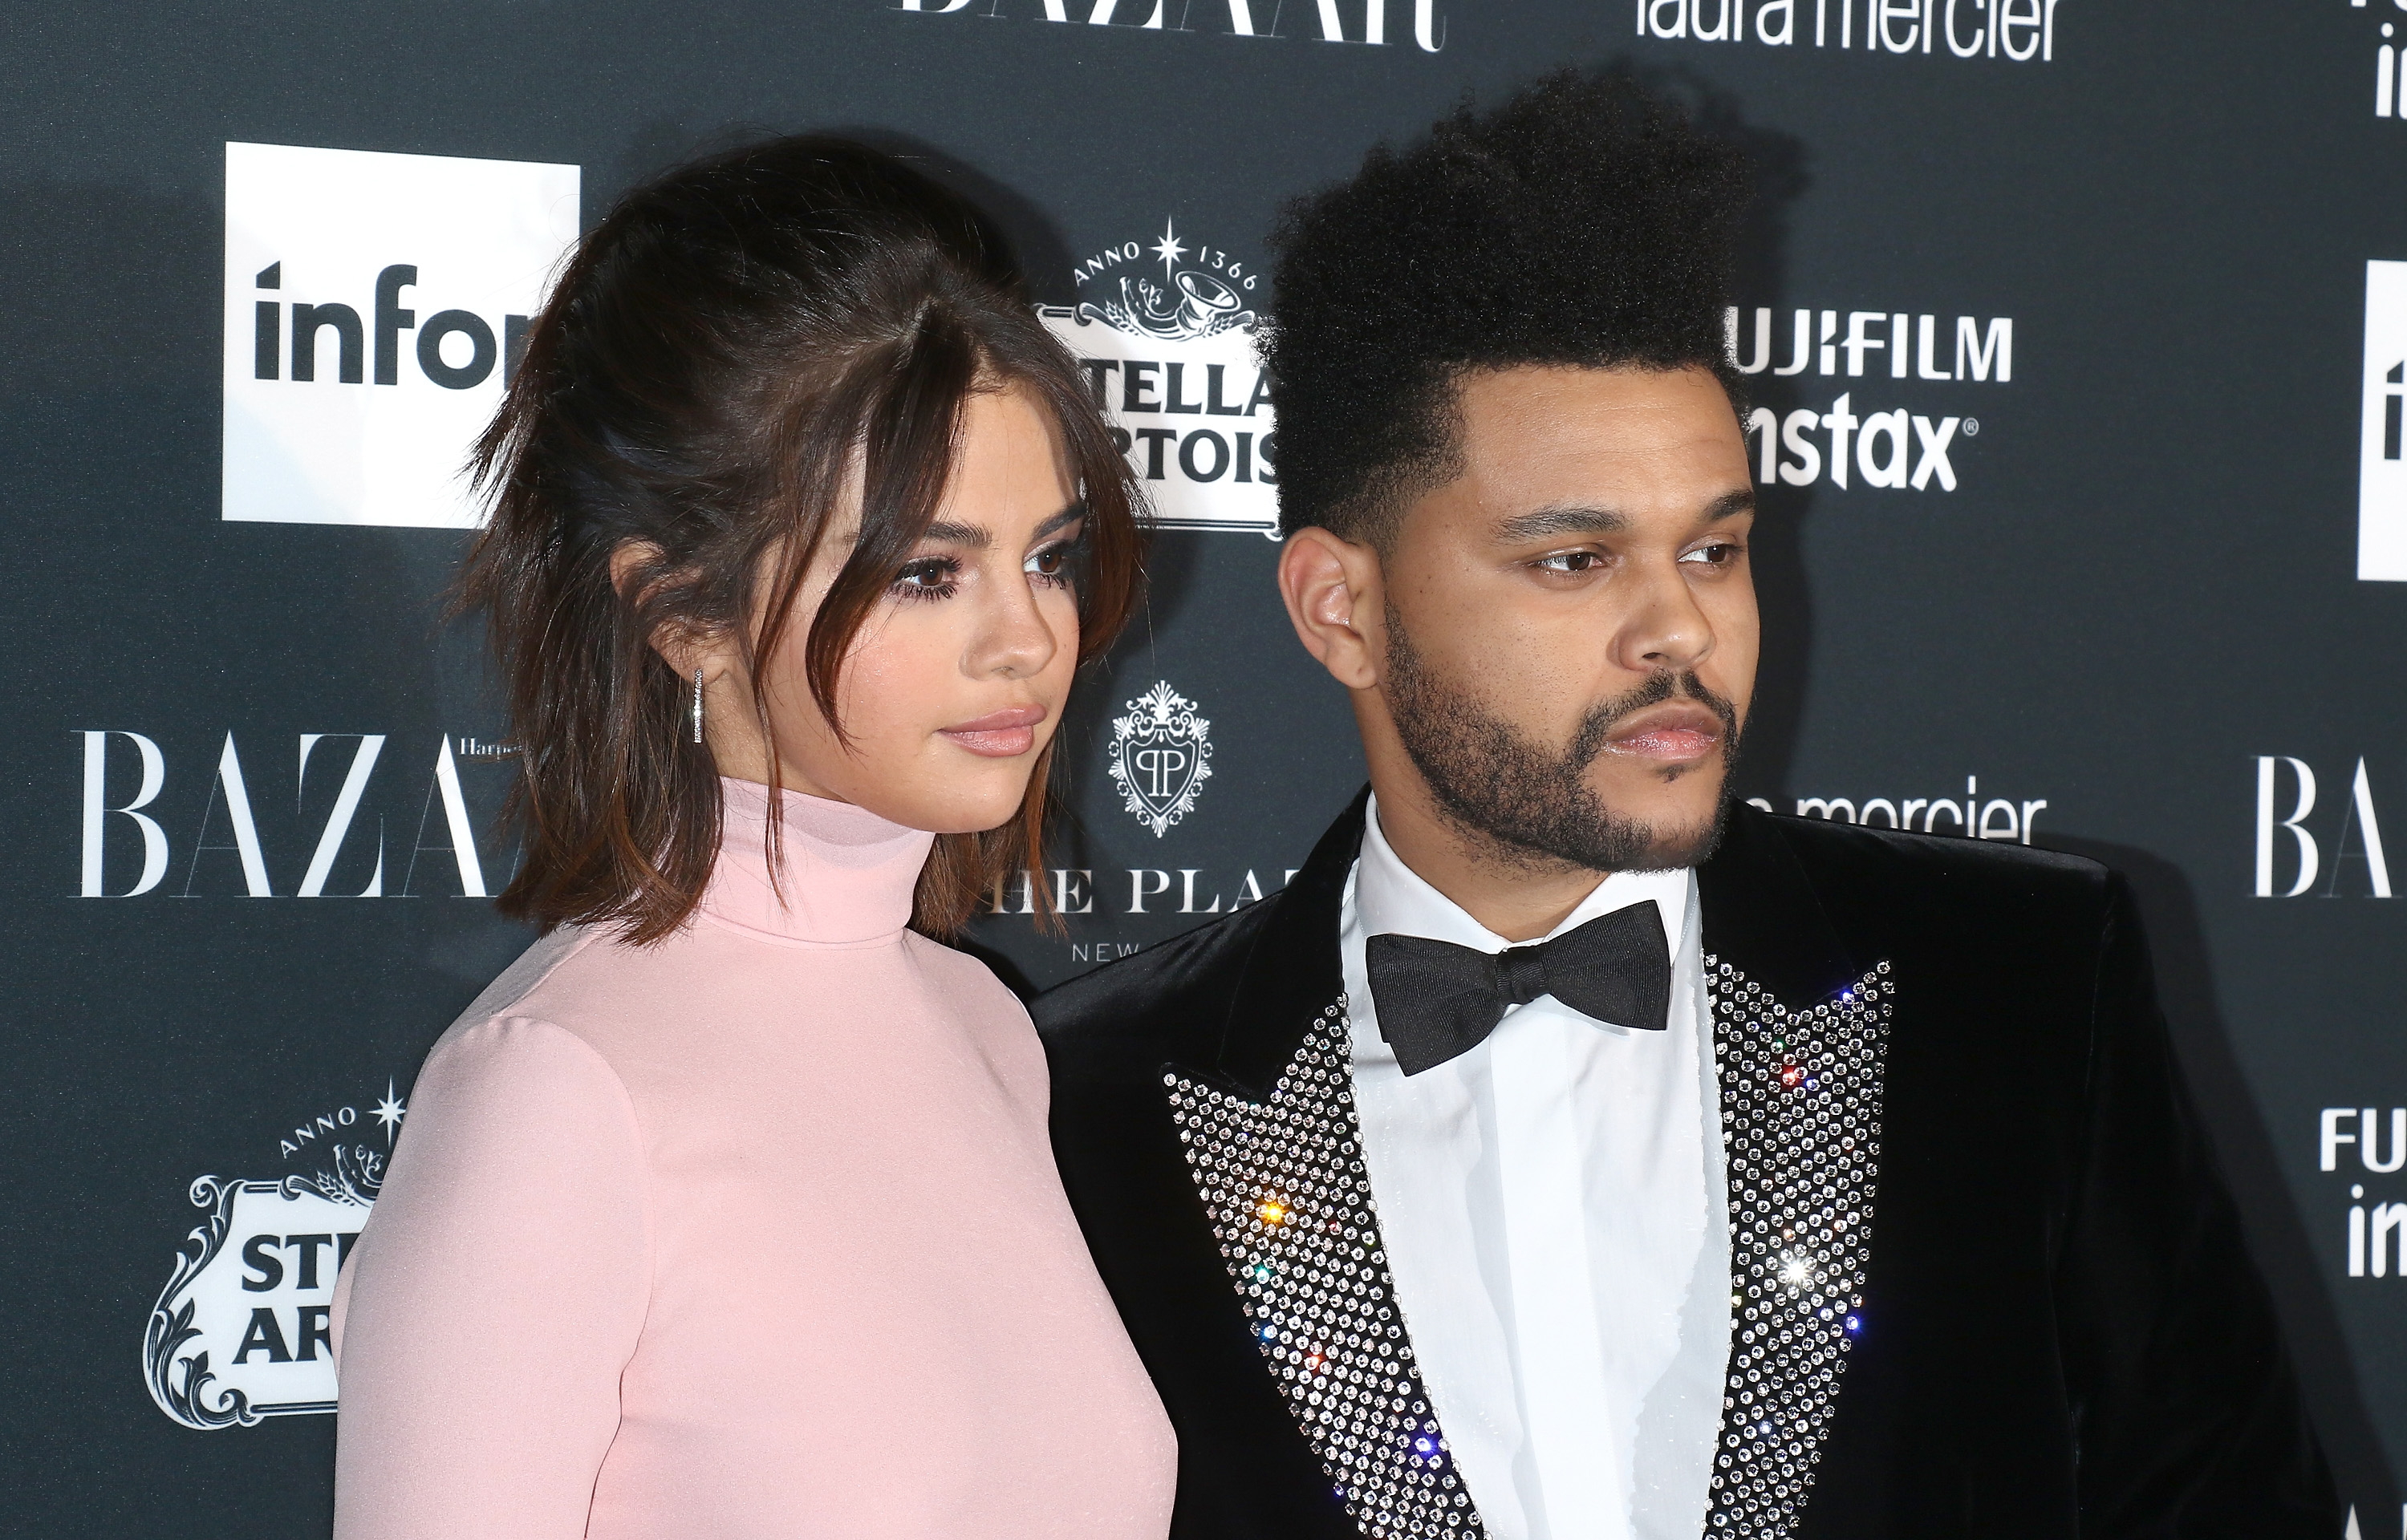 Met Gala 2017: Selena Gomez and The Weeknd Make Their Official